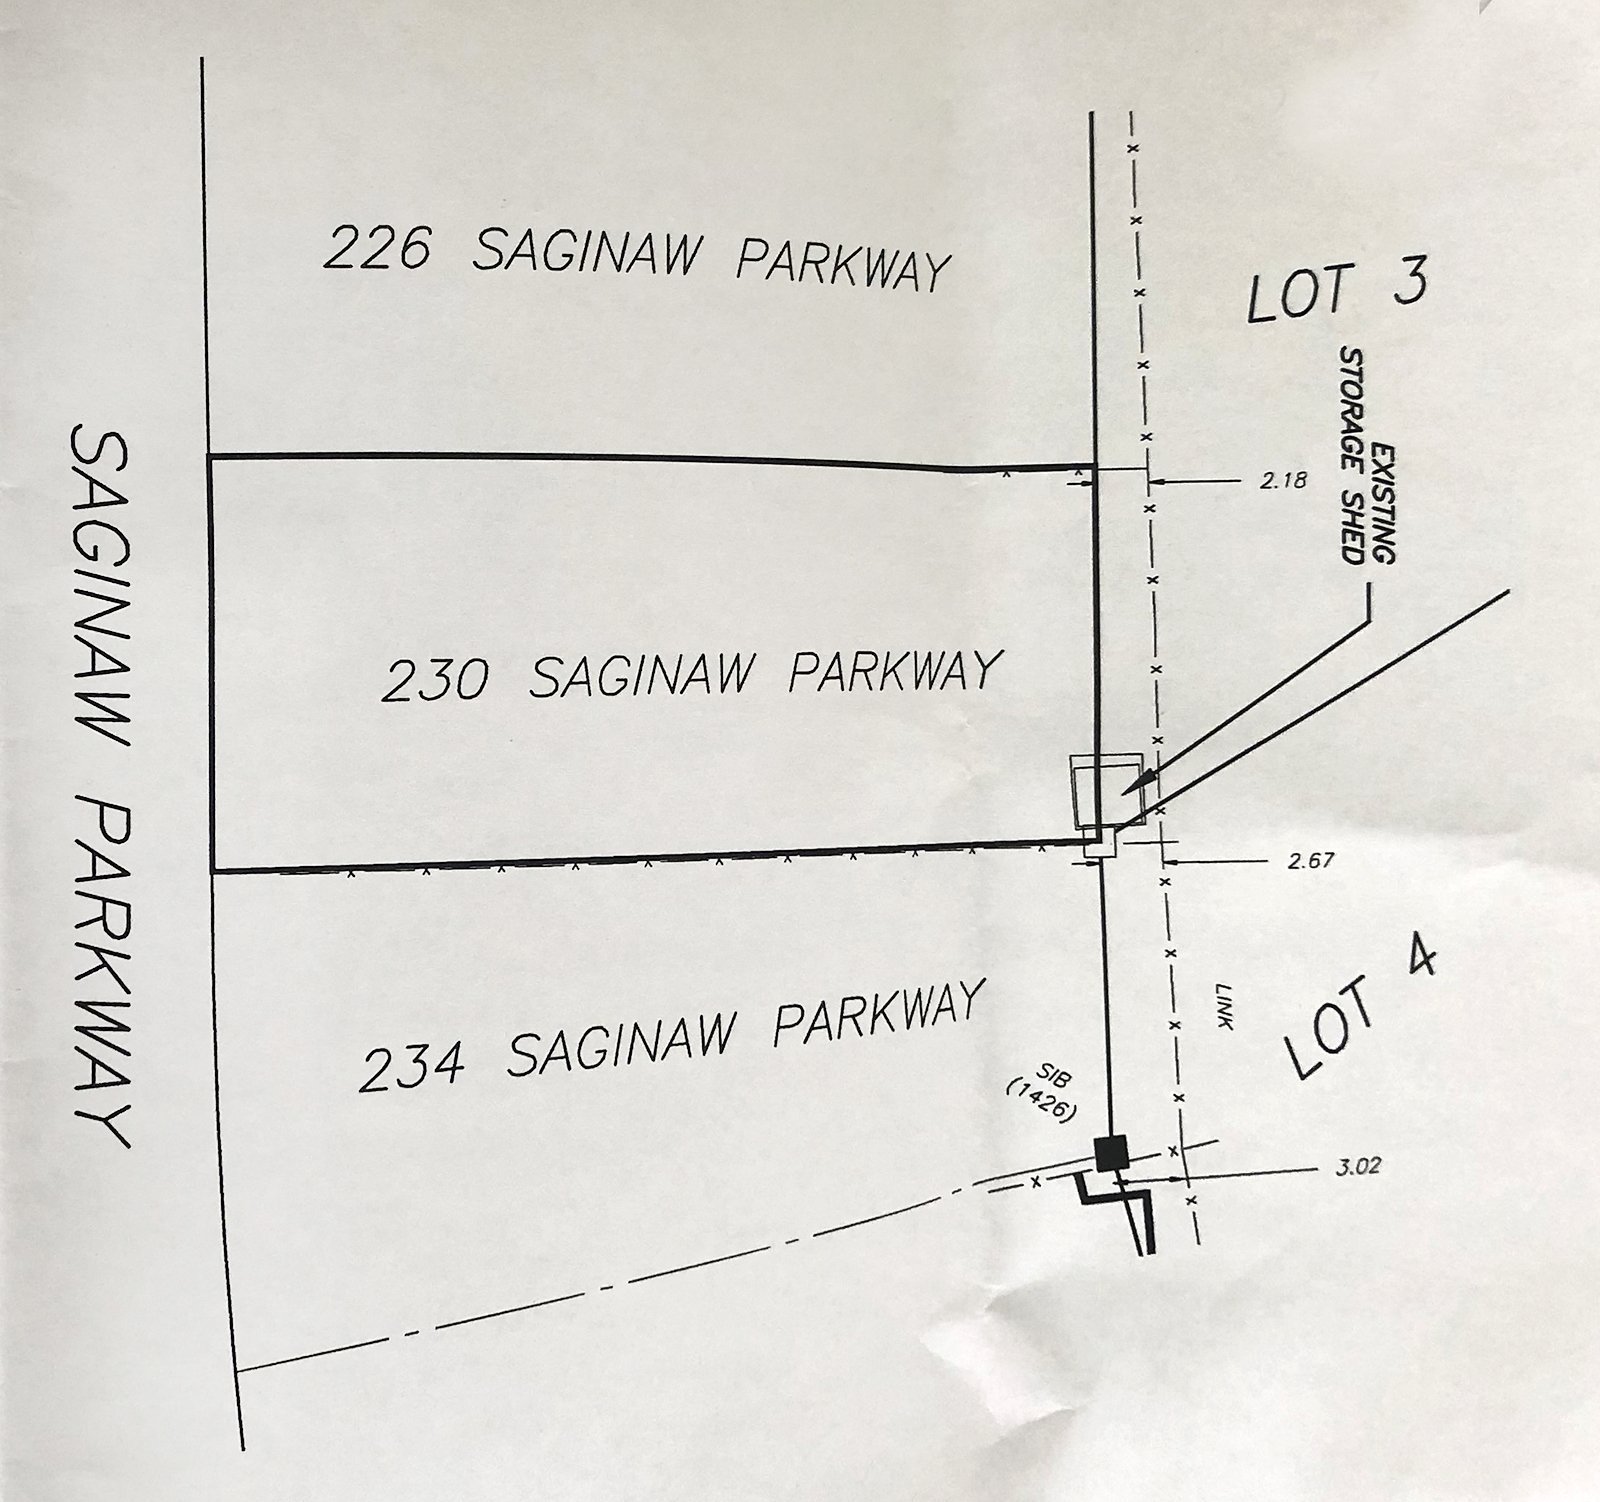 The survey that came with the registered letter to David Clark showing how much his shed goes over the original property line at 230 Saginaw Pkwy.